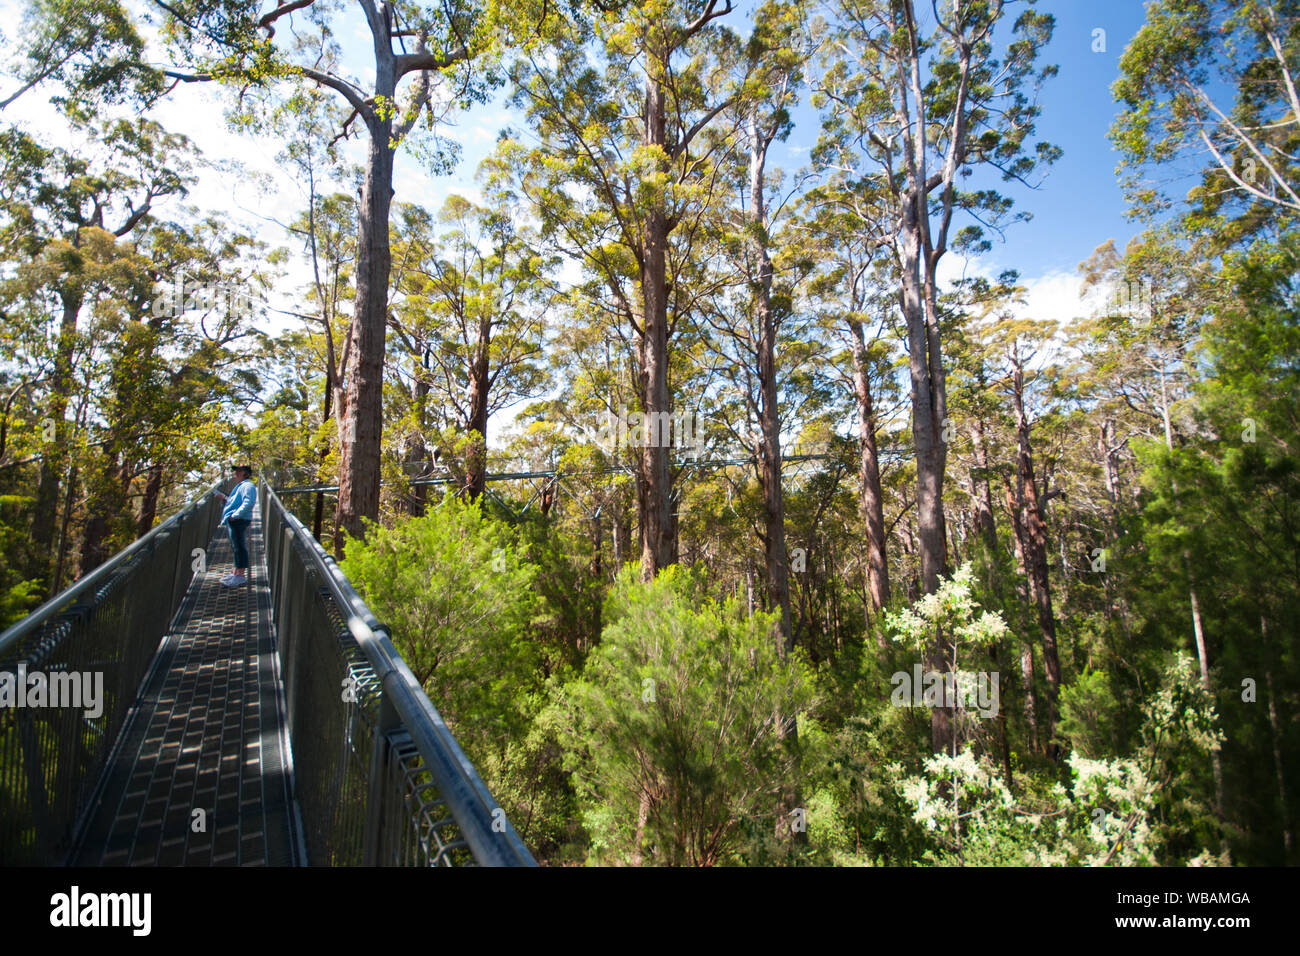 Valley of the Giants Treetop Walk, steel truss-supported walkway in forest of Red tingle (Eucalyptus jacksonii). Walpole-Nornalup National Park, Weste Stock Photo